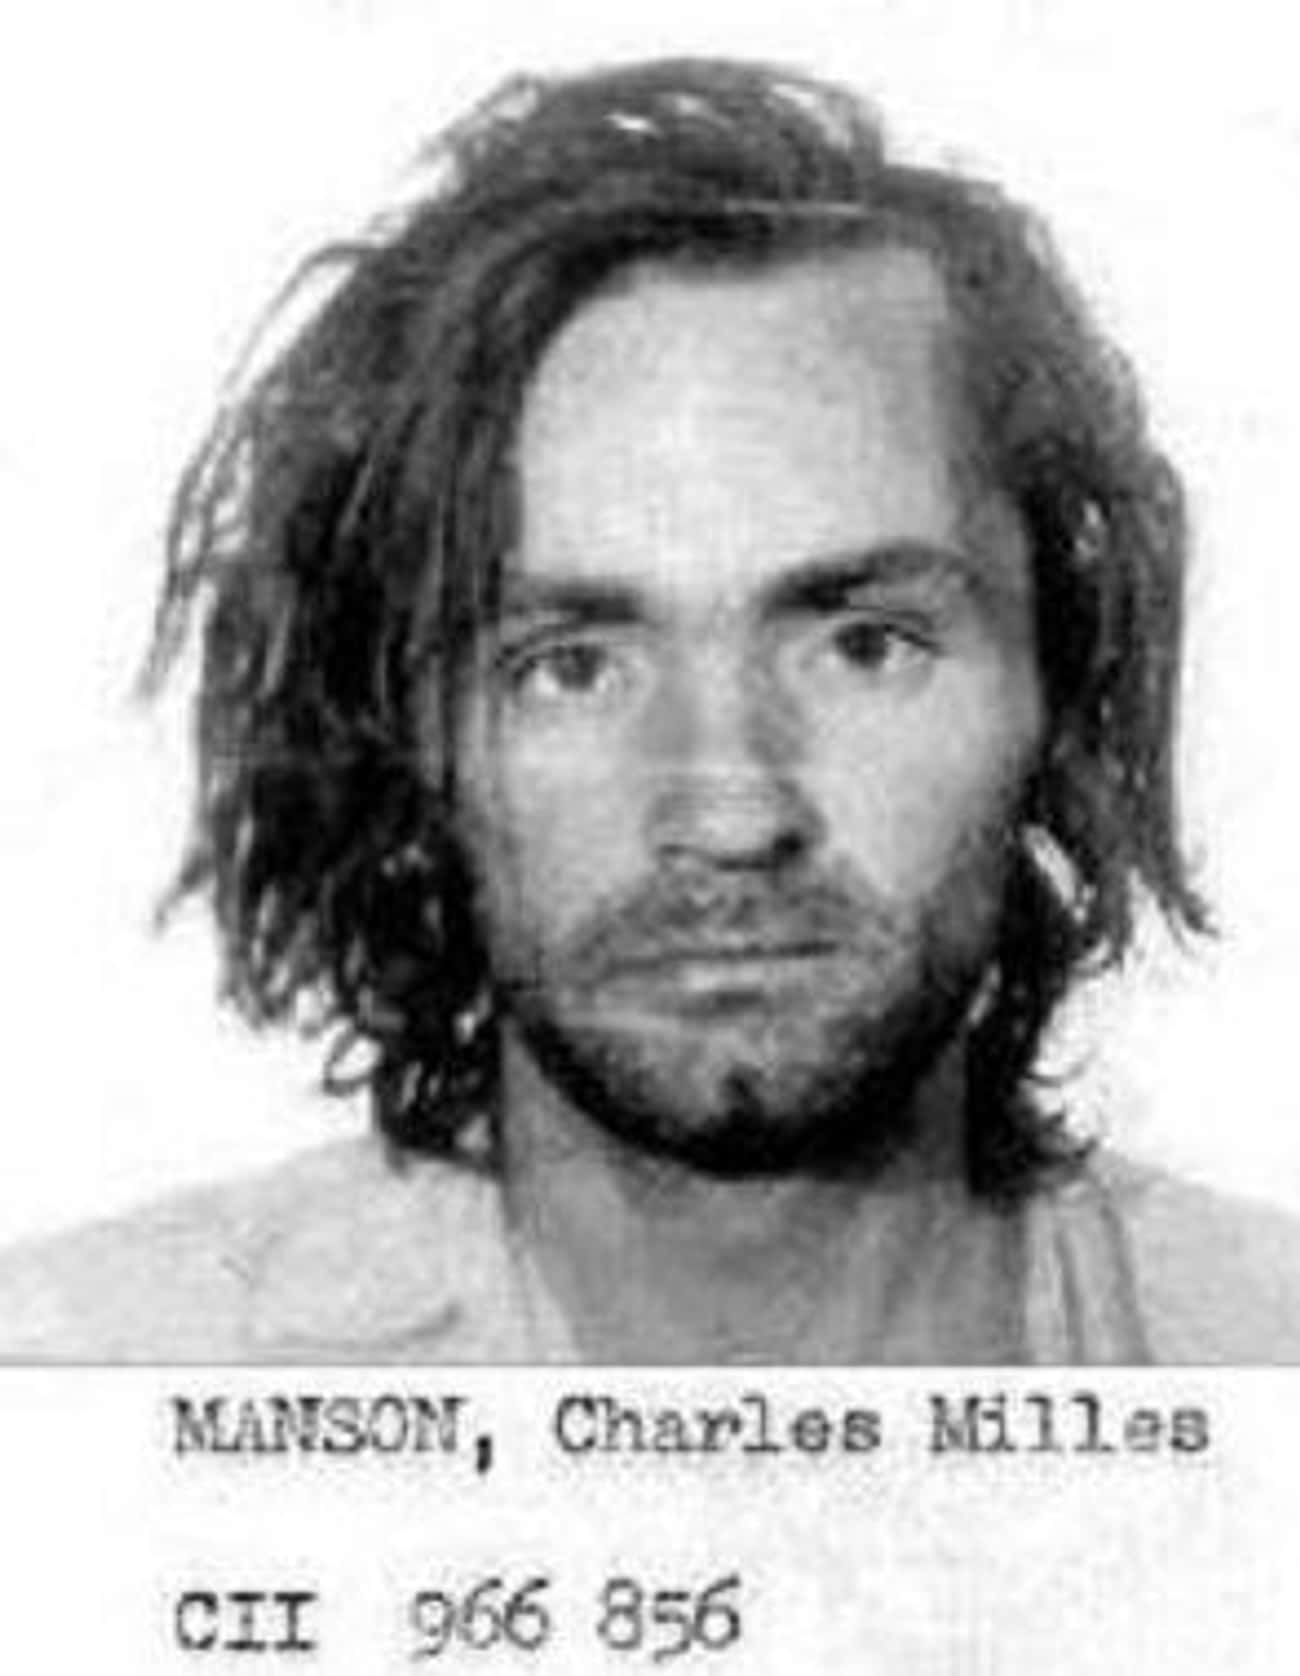 Participating In Manson's Trial Was Extremely Dangerous